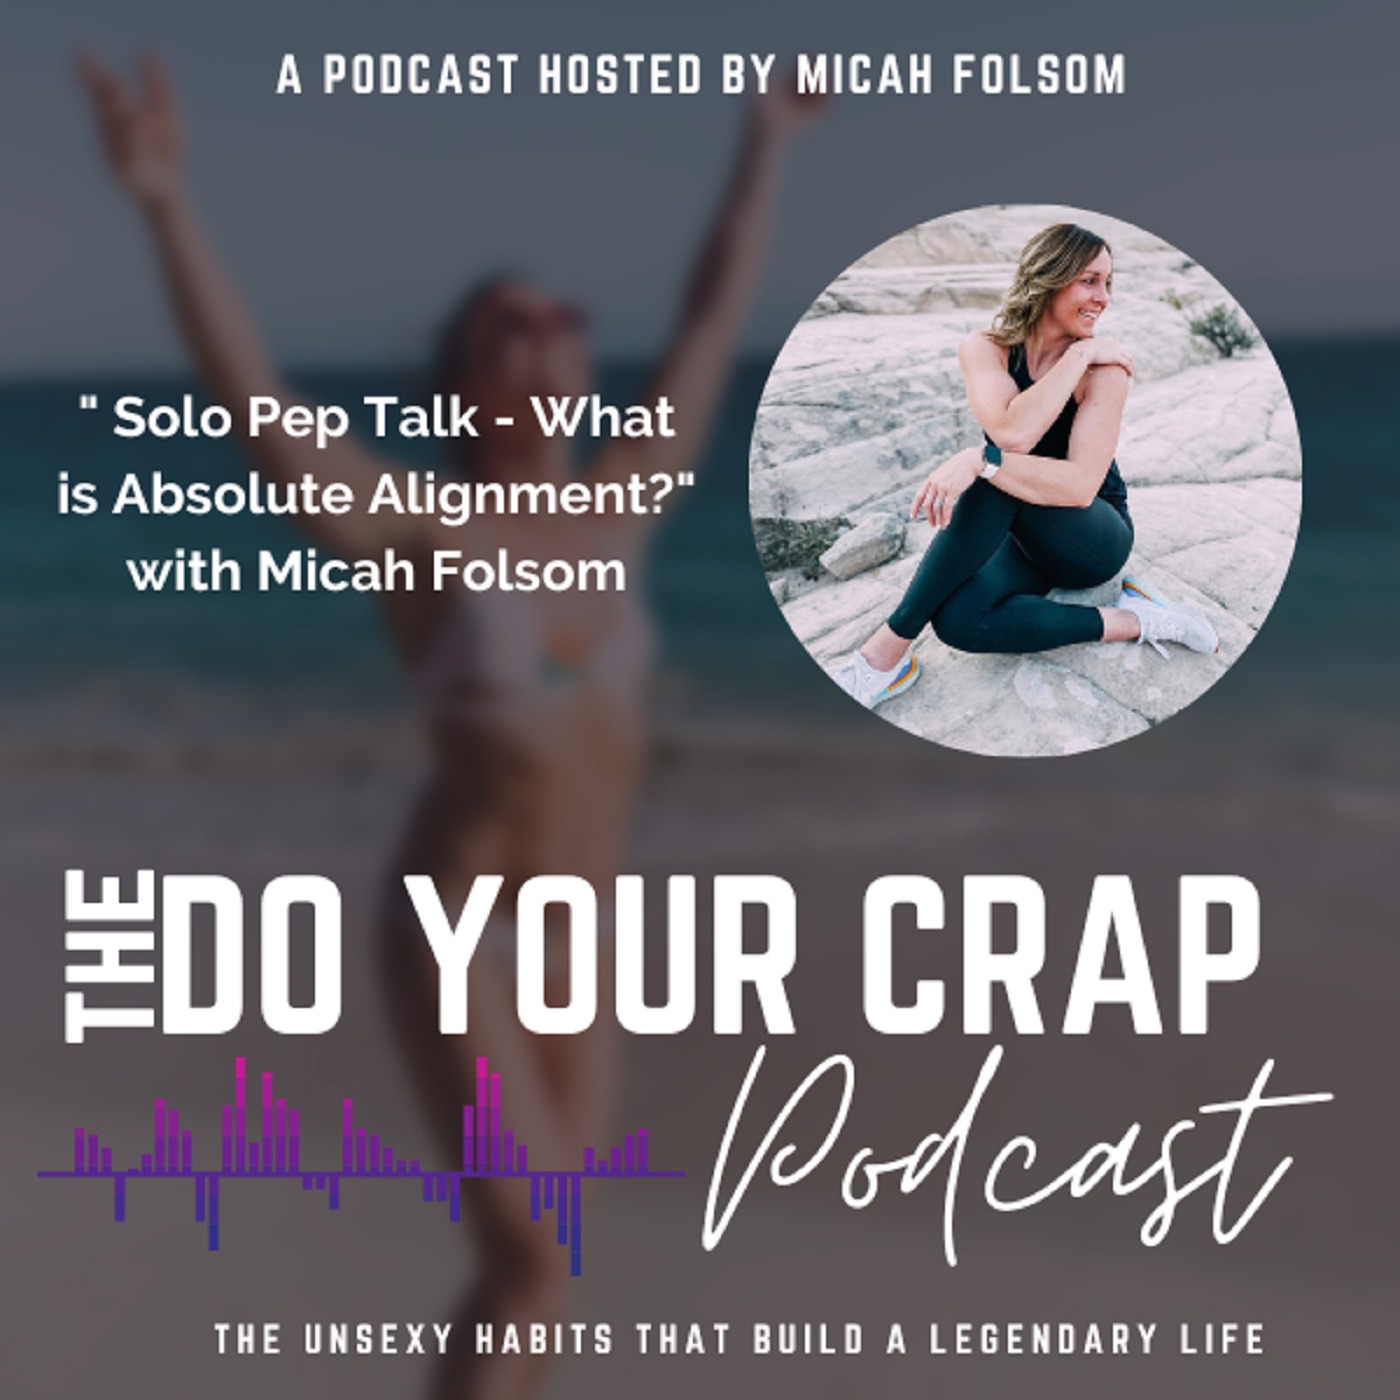 Solo Pep Talk - What is Absolute Alignment? with Micah Folsom